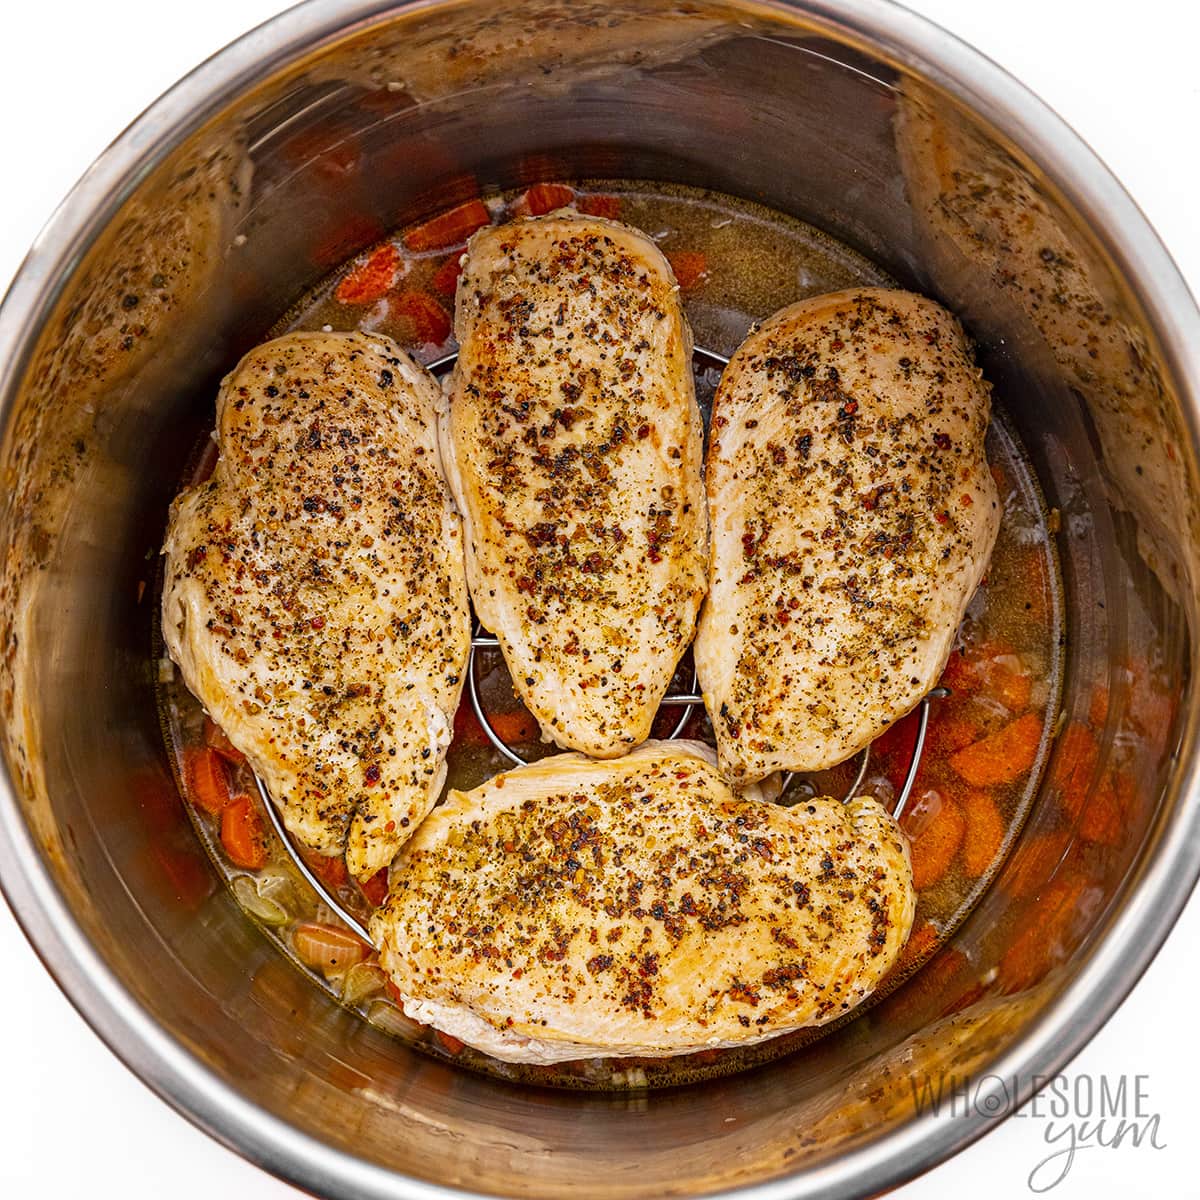 Arrange the seasoned chicken over the rice and vegetables in the Instant Pot.